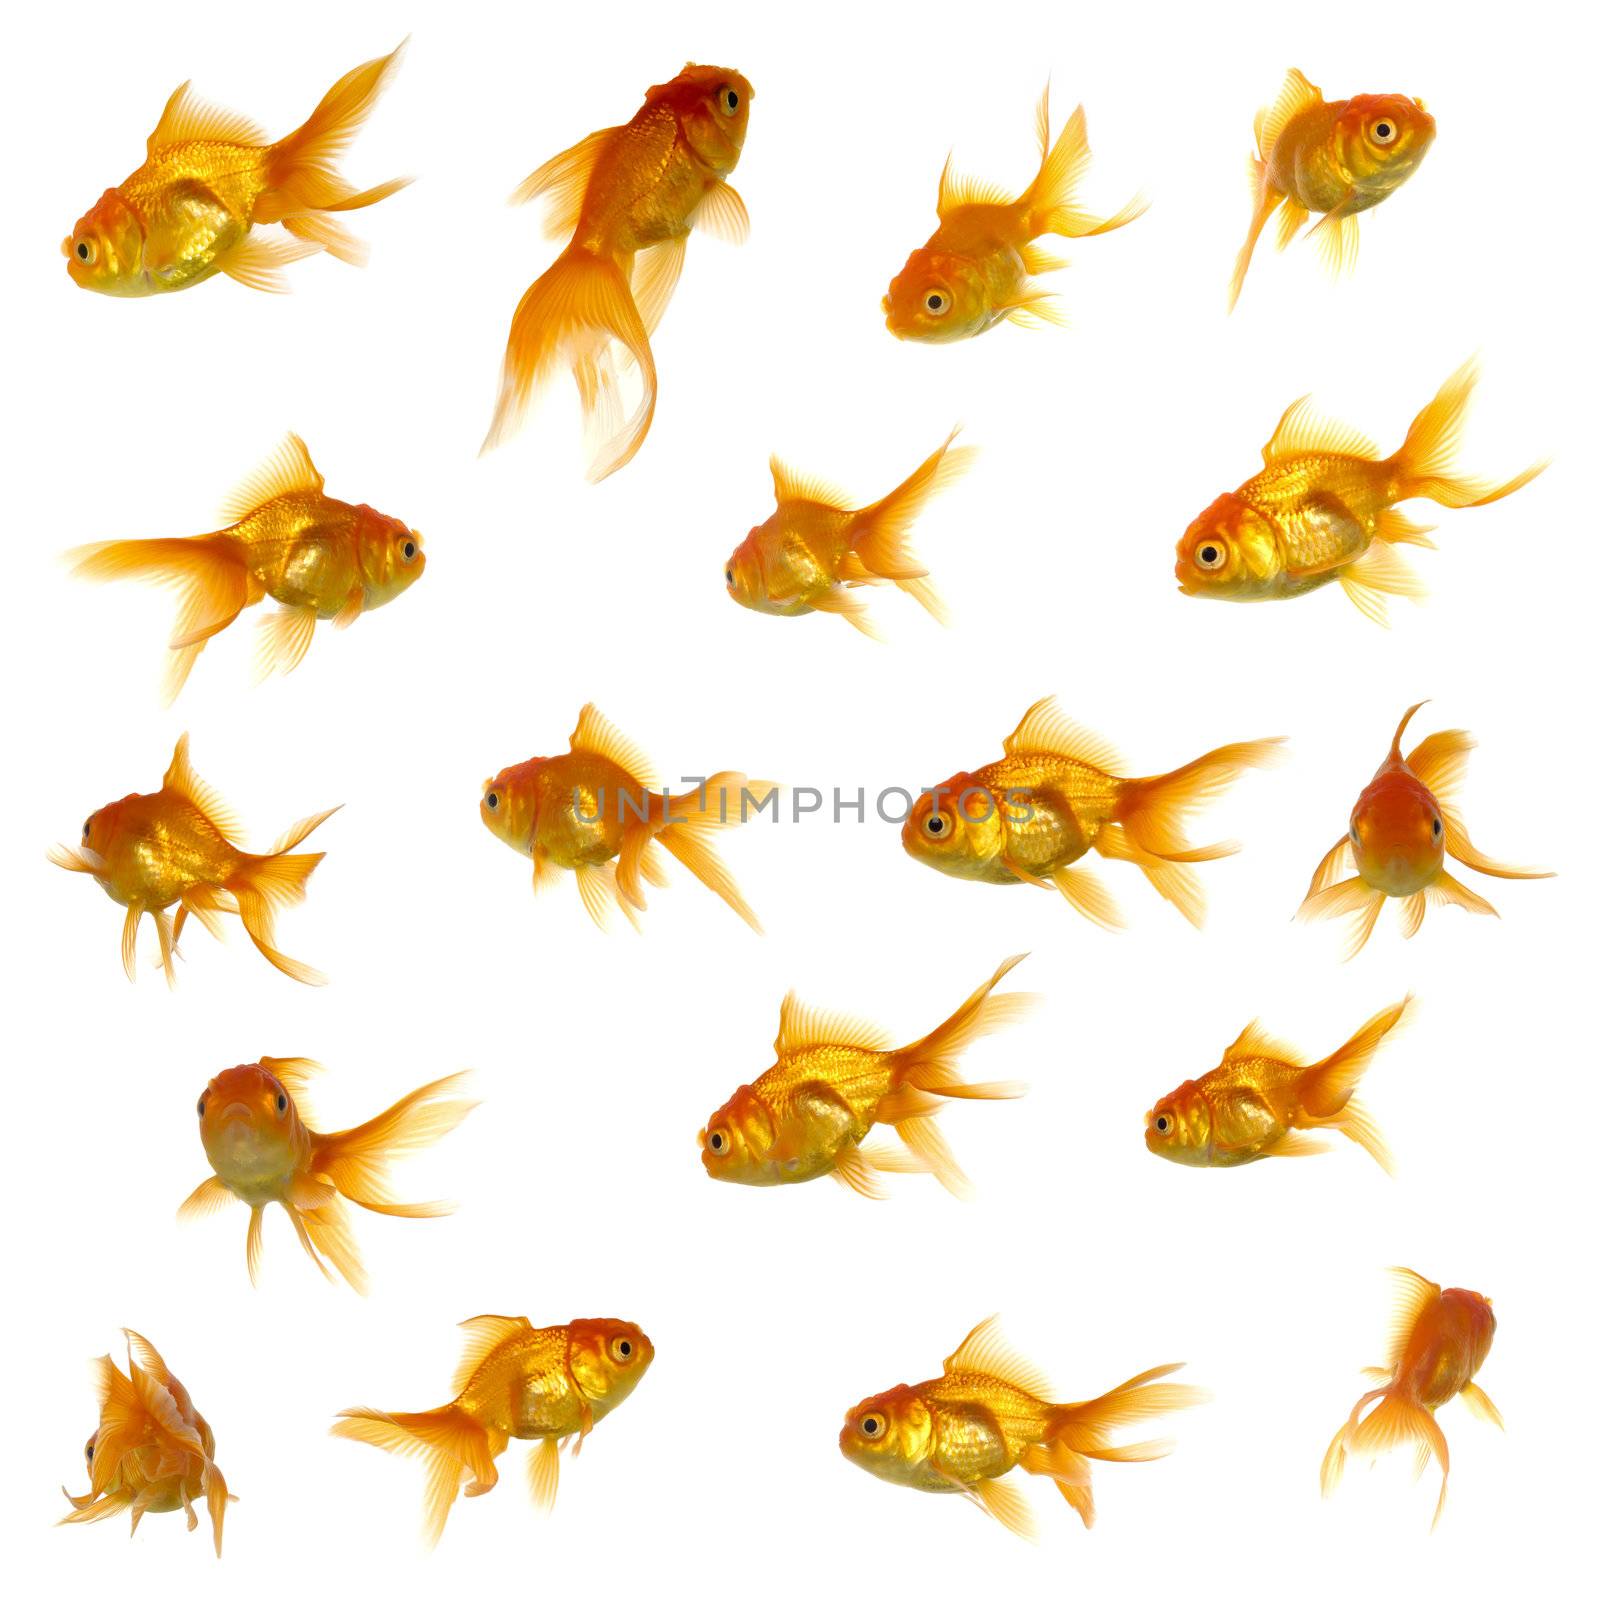 Collection of goldfish. High resolution 5000 x 5000 pixels. On clean white background.